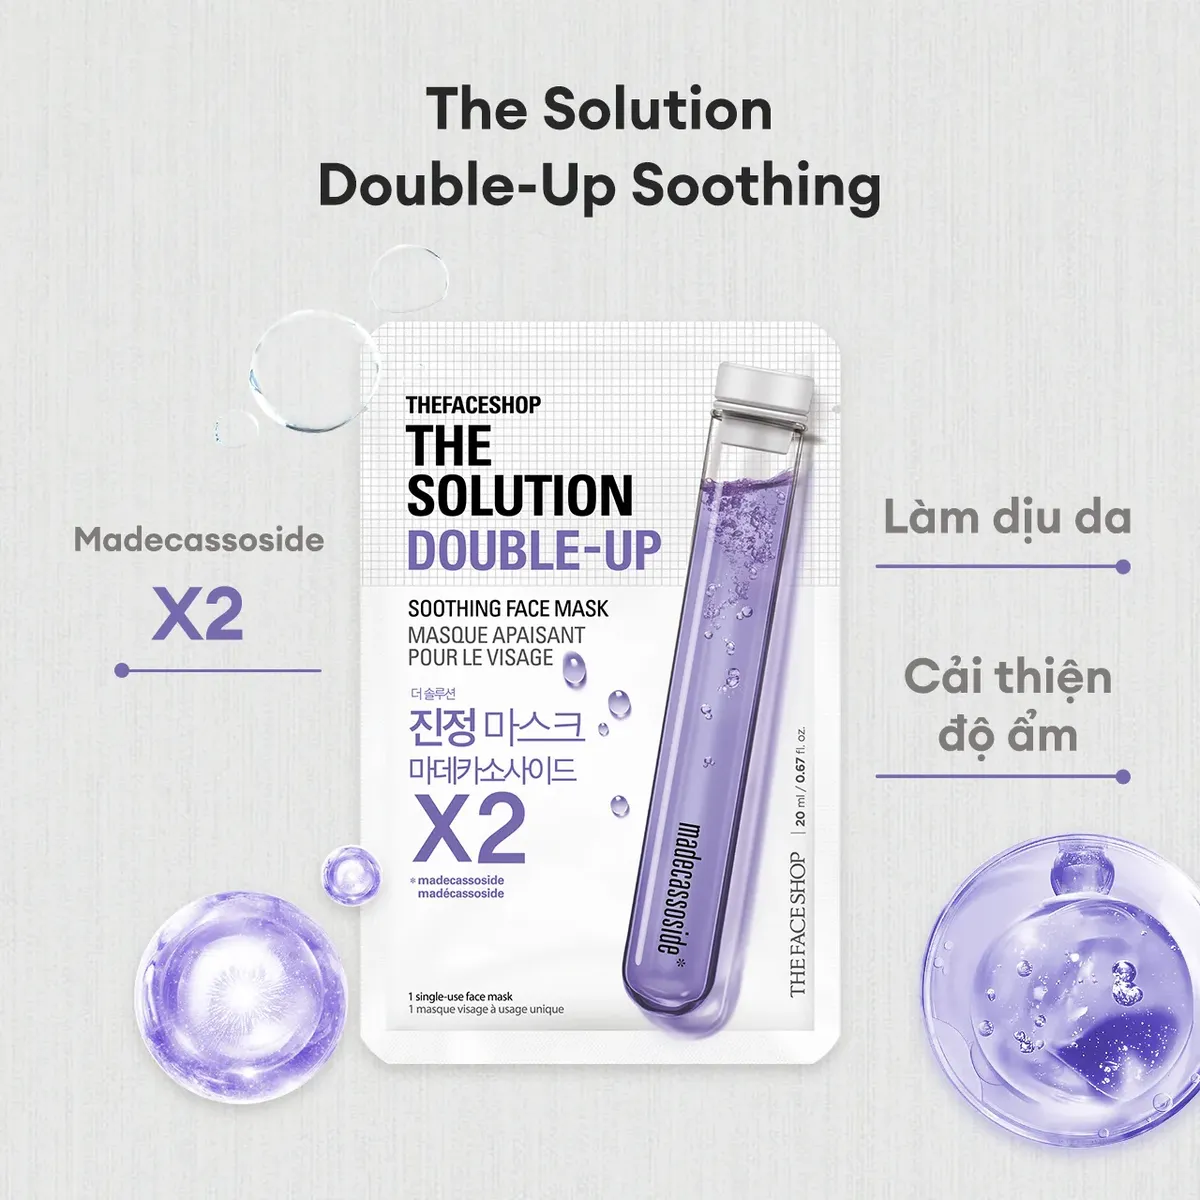 mat-na-cap-am-lam-diu-da-the-solution-double-up-soothing-face-mask-2